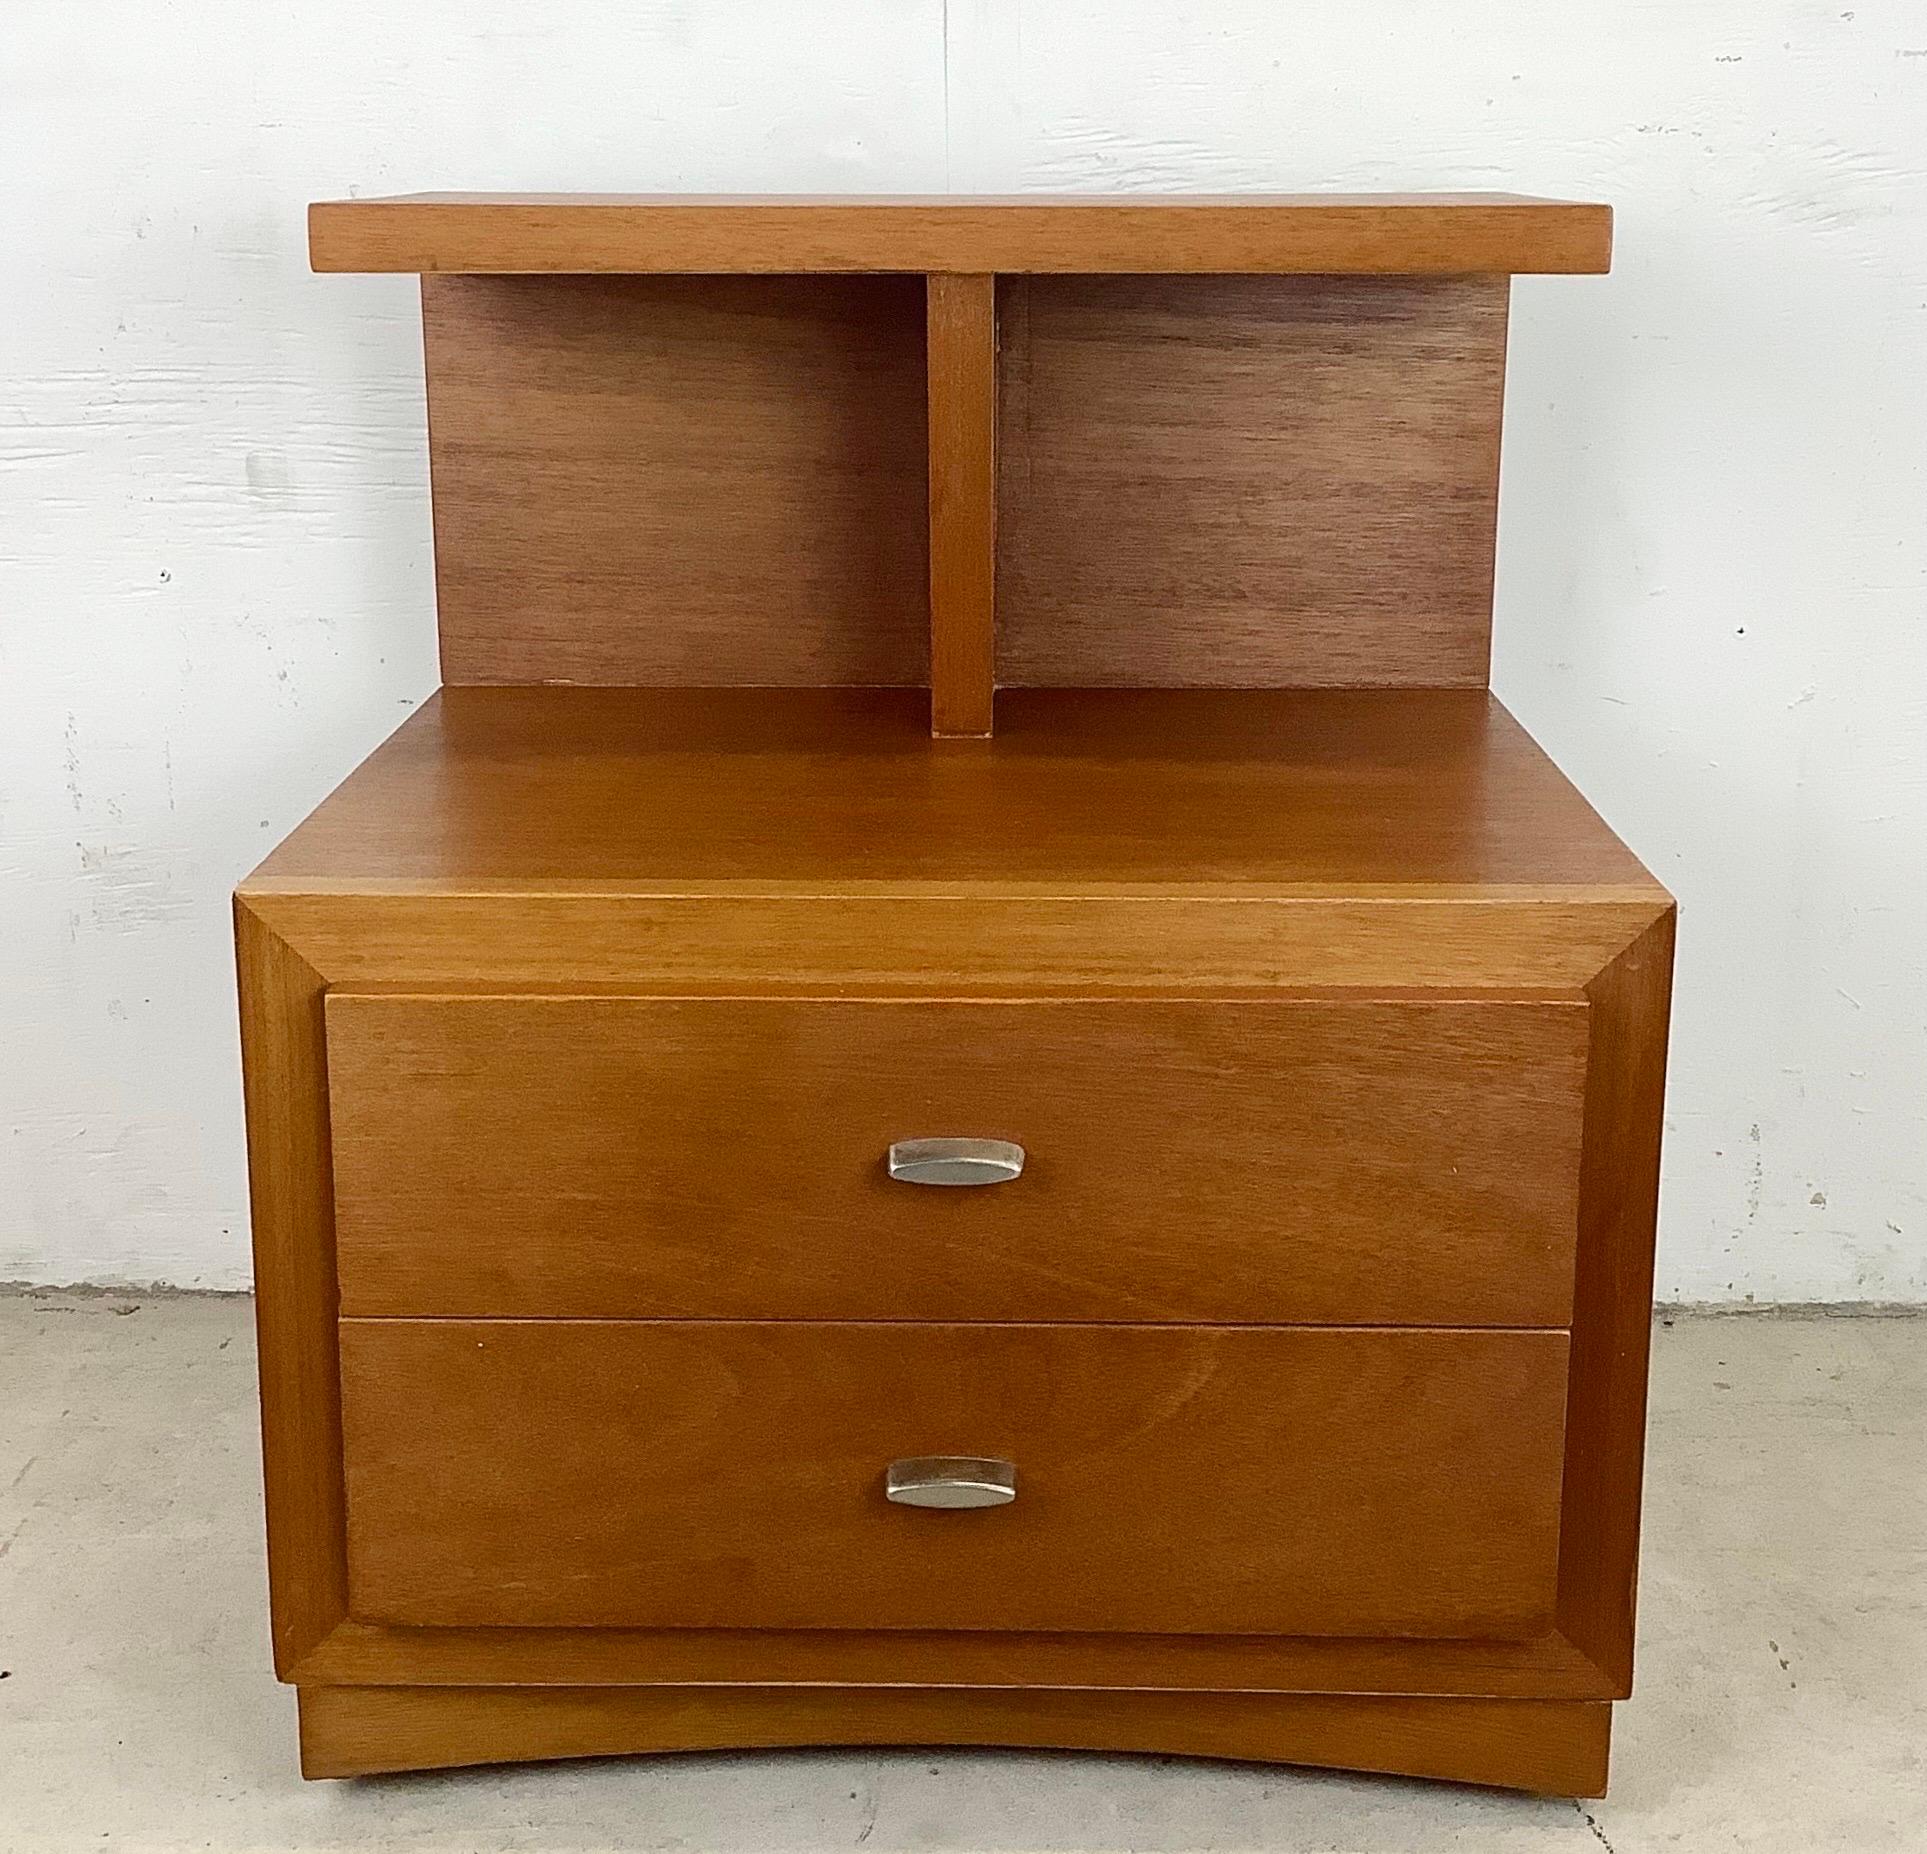 Mid-Century Modern nightstand from Phenix furniture features shapely two-tier arrangement with sculptural design and a mixture of tabletop and drawer storage. This large mid-century side table is a perfect nightstand or sofa side table set on